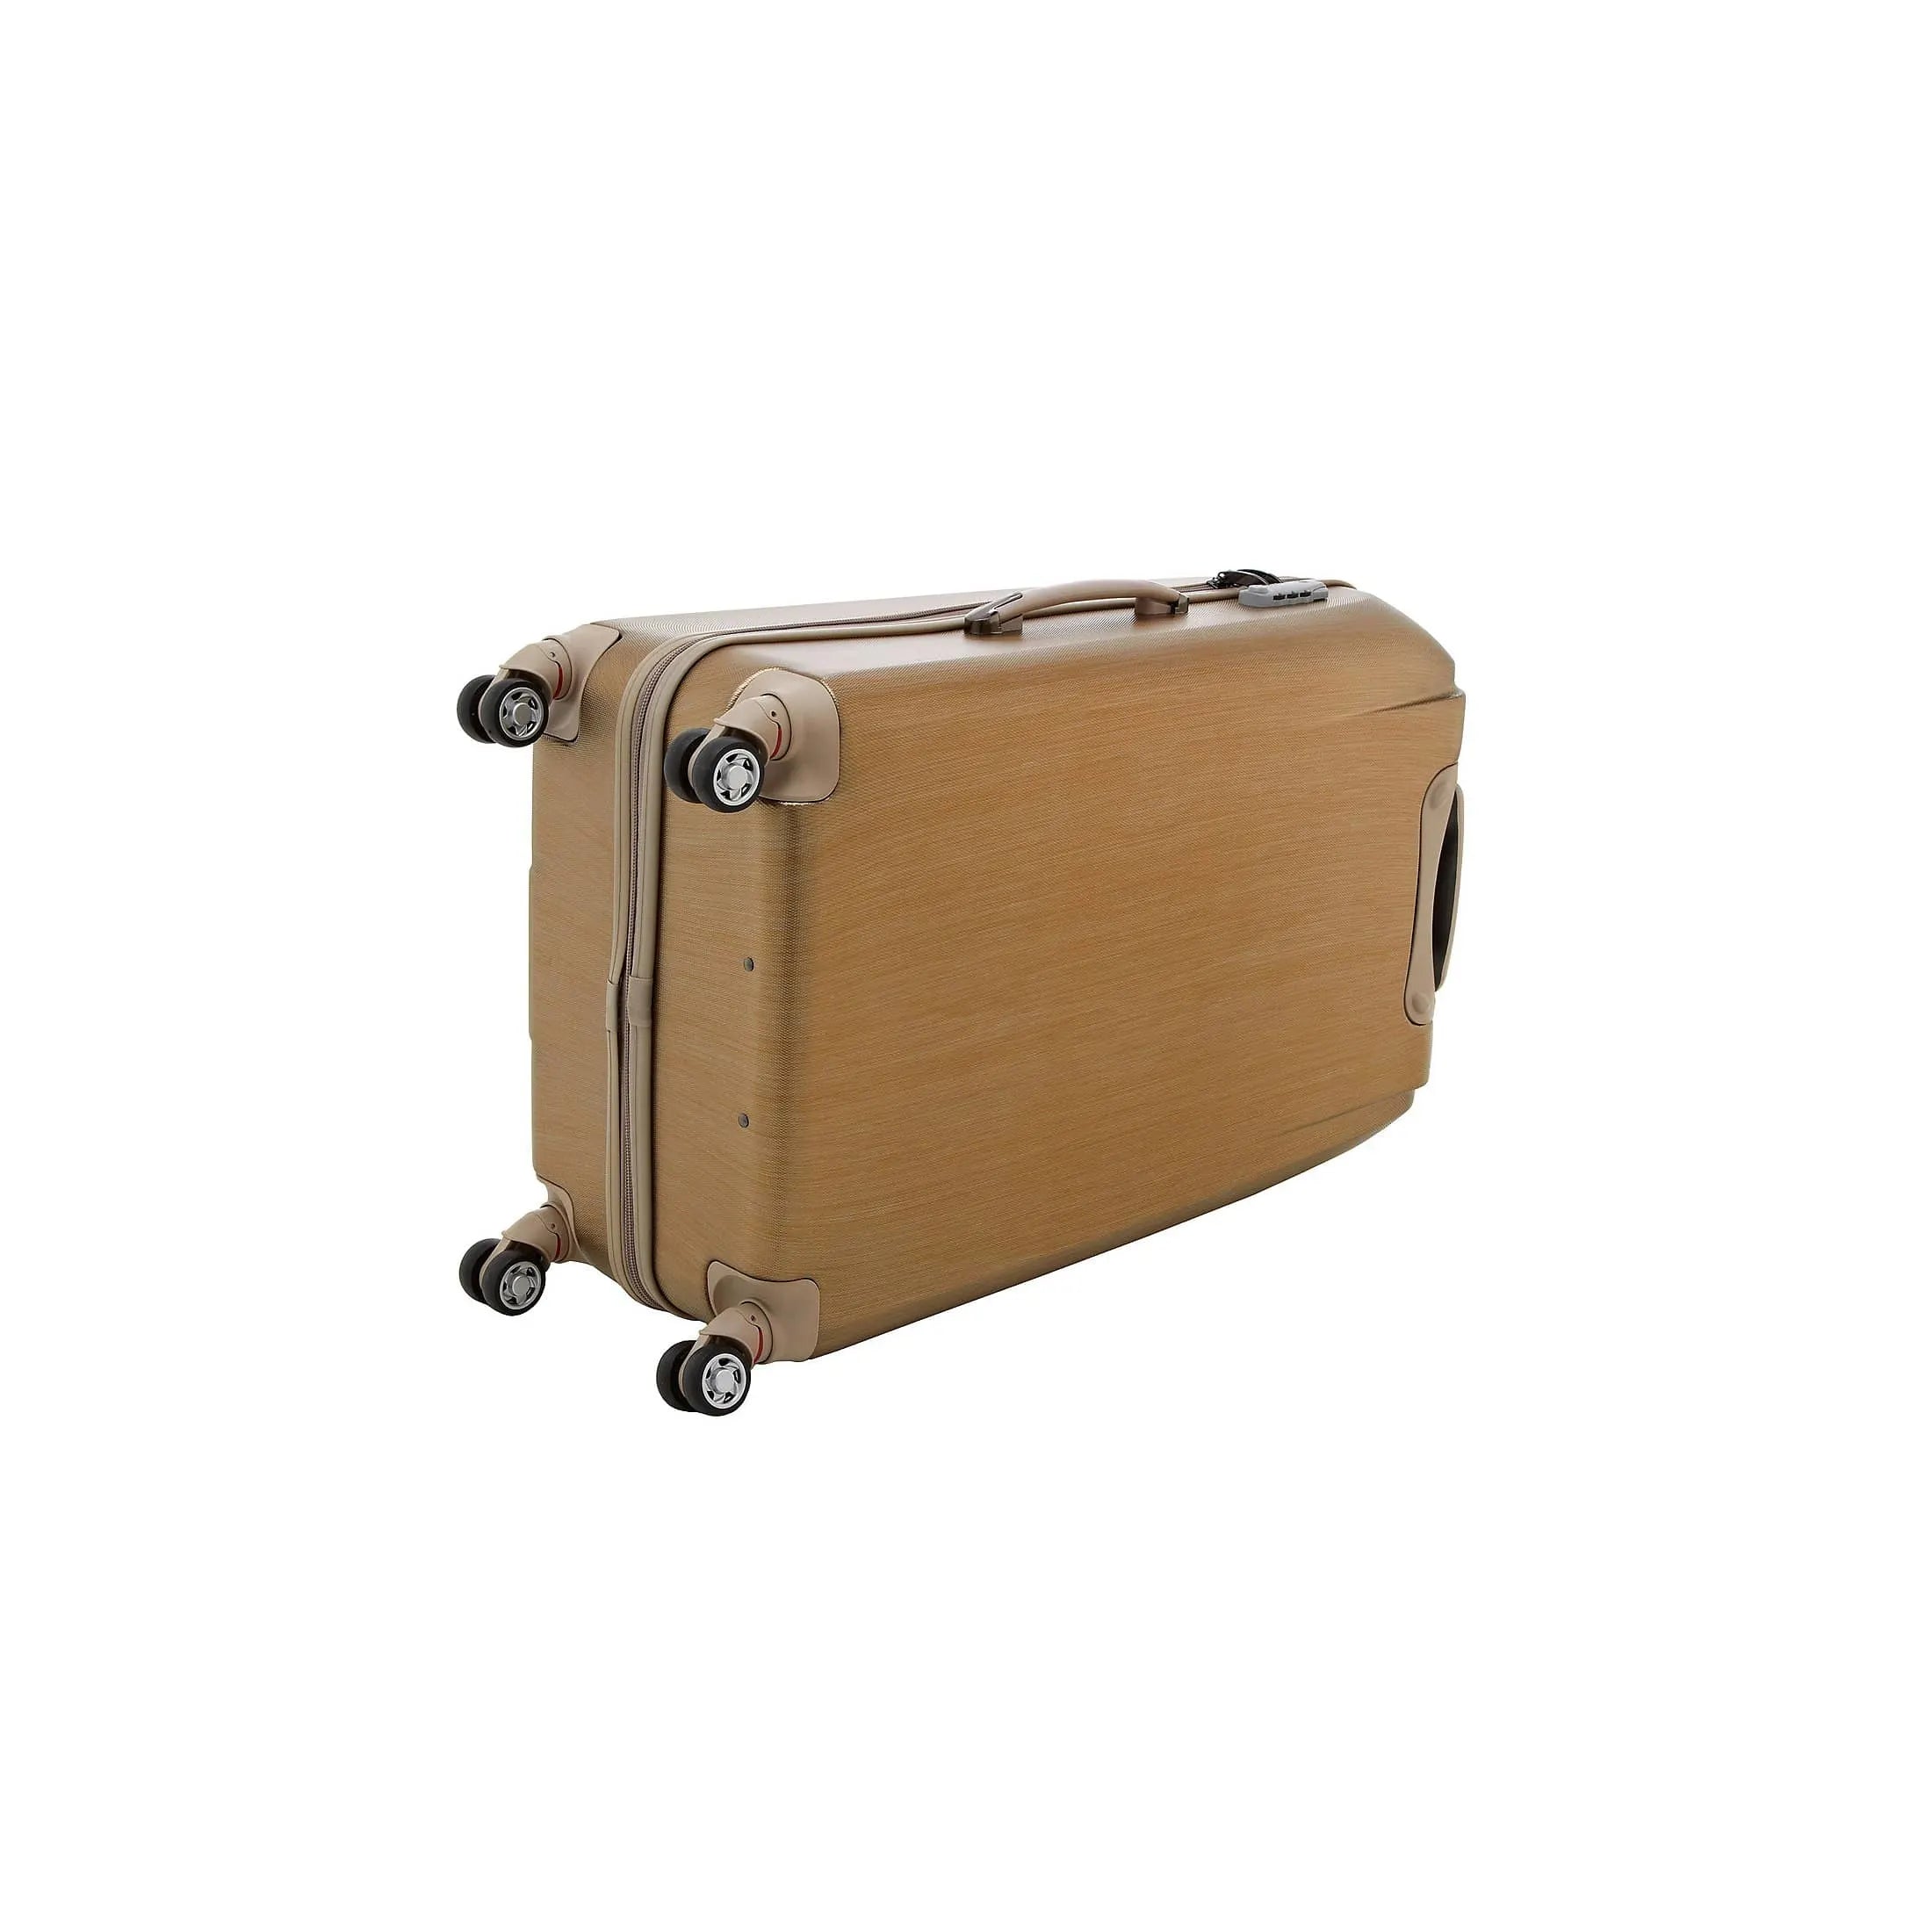 March 15 Trading New Carat 4-Rollen-Trolley 65 cm - Bronze Brushed